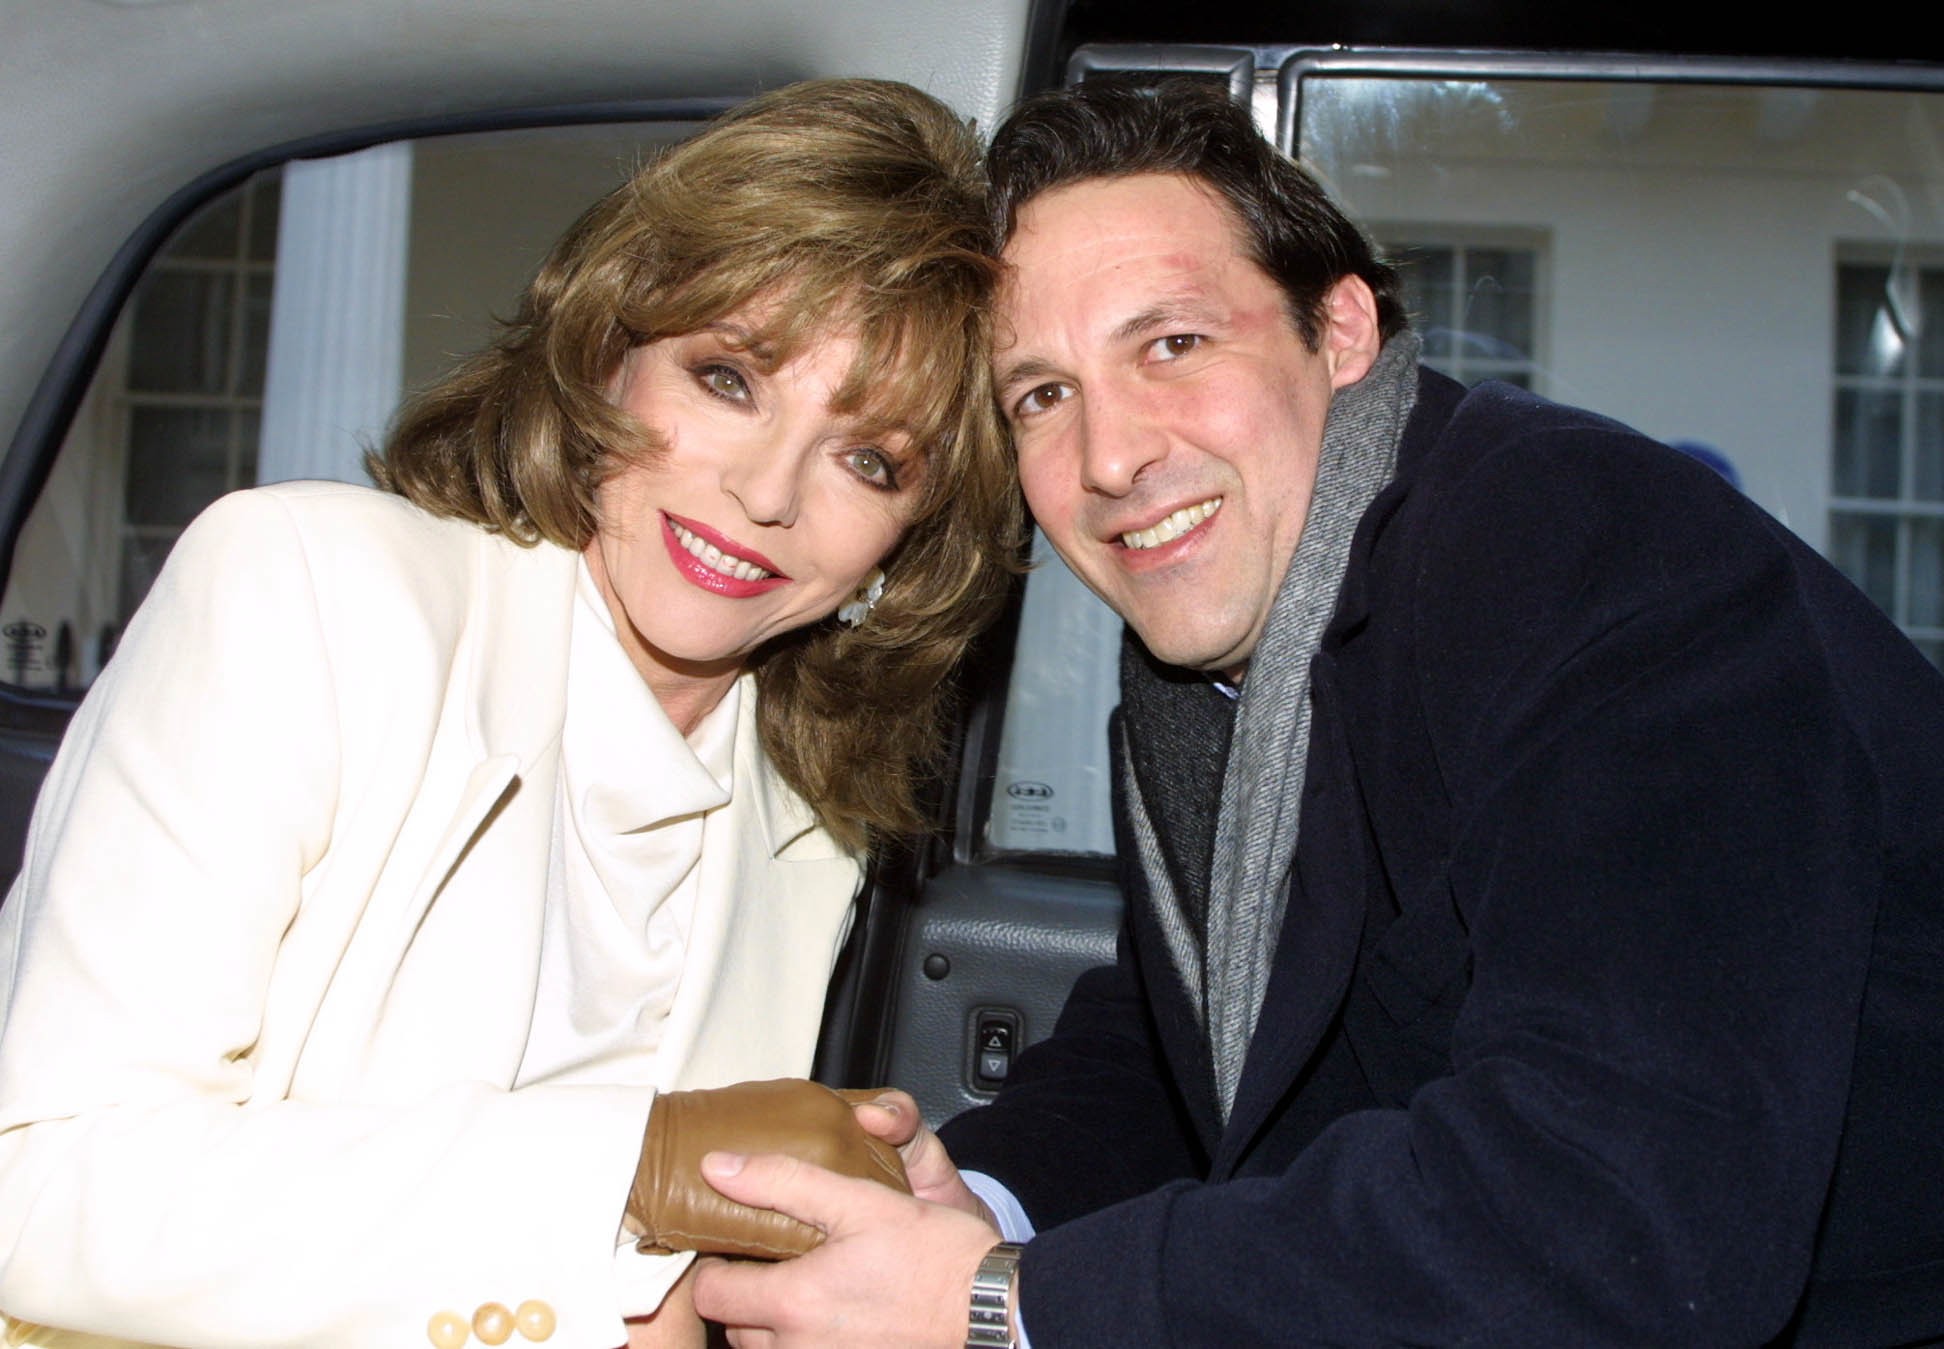 Joan Collins announces her engagement to Percy Gibson in London on December 19, 2001 | Source: Getty Images